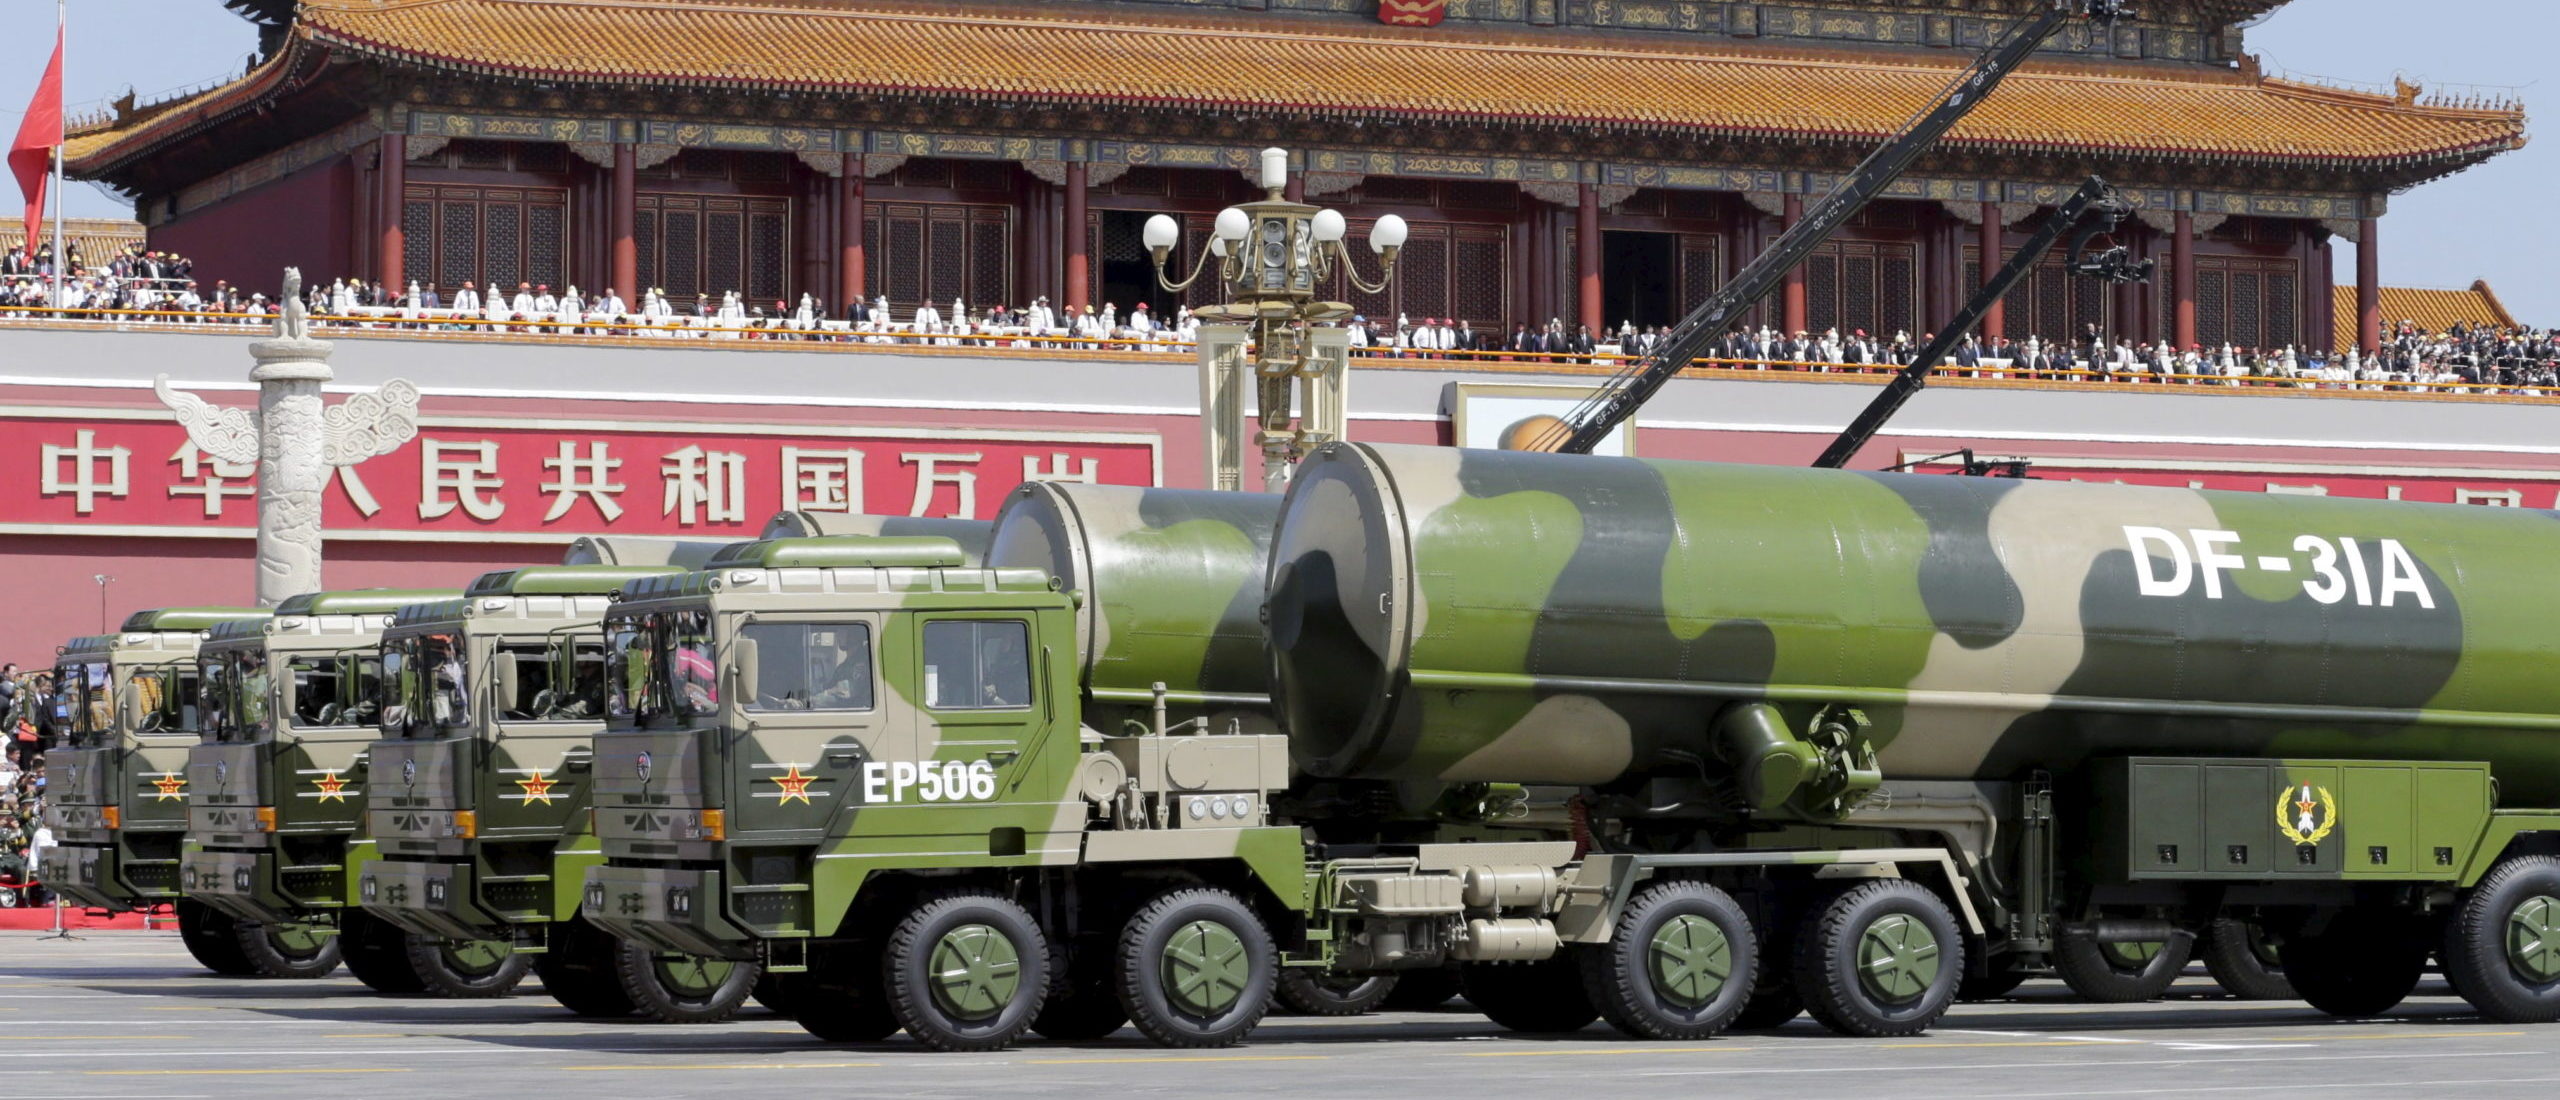 Military vehicles carrying DF-31A long-range missiles drive past the Tiananmen Gate during a military parade to mark the 70th anniversary of the end of World War Two, in Beijing, China, September 3, 2015. (REUTERS/Jason Lee)